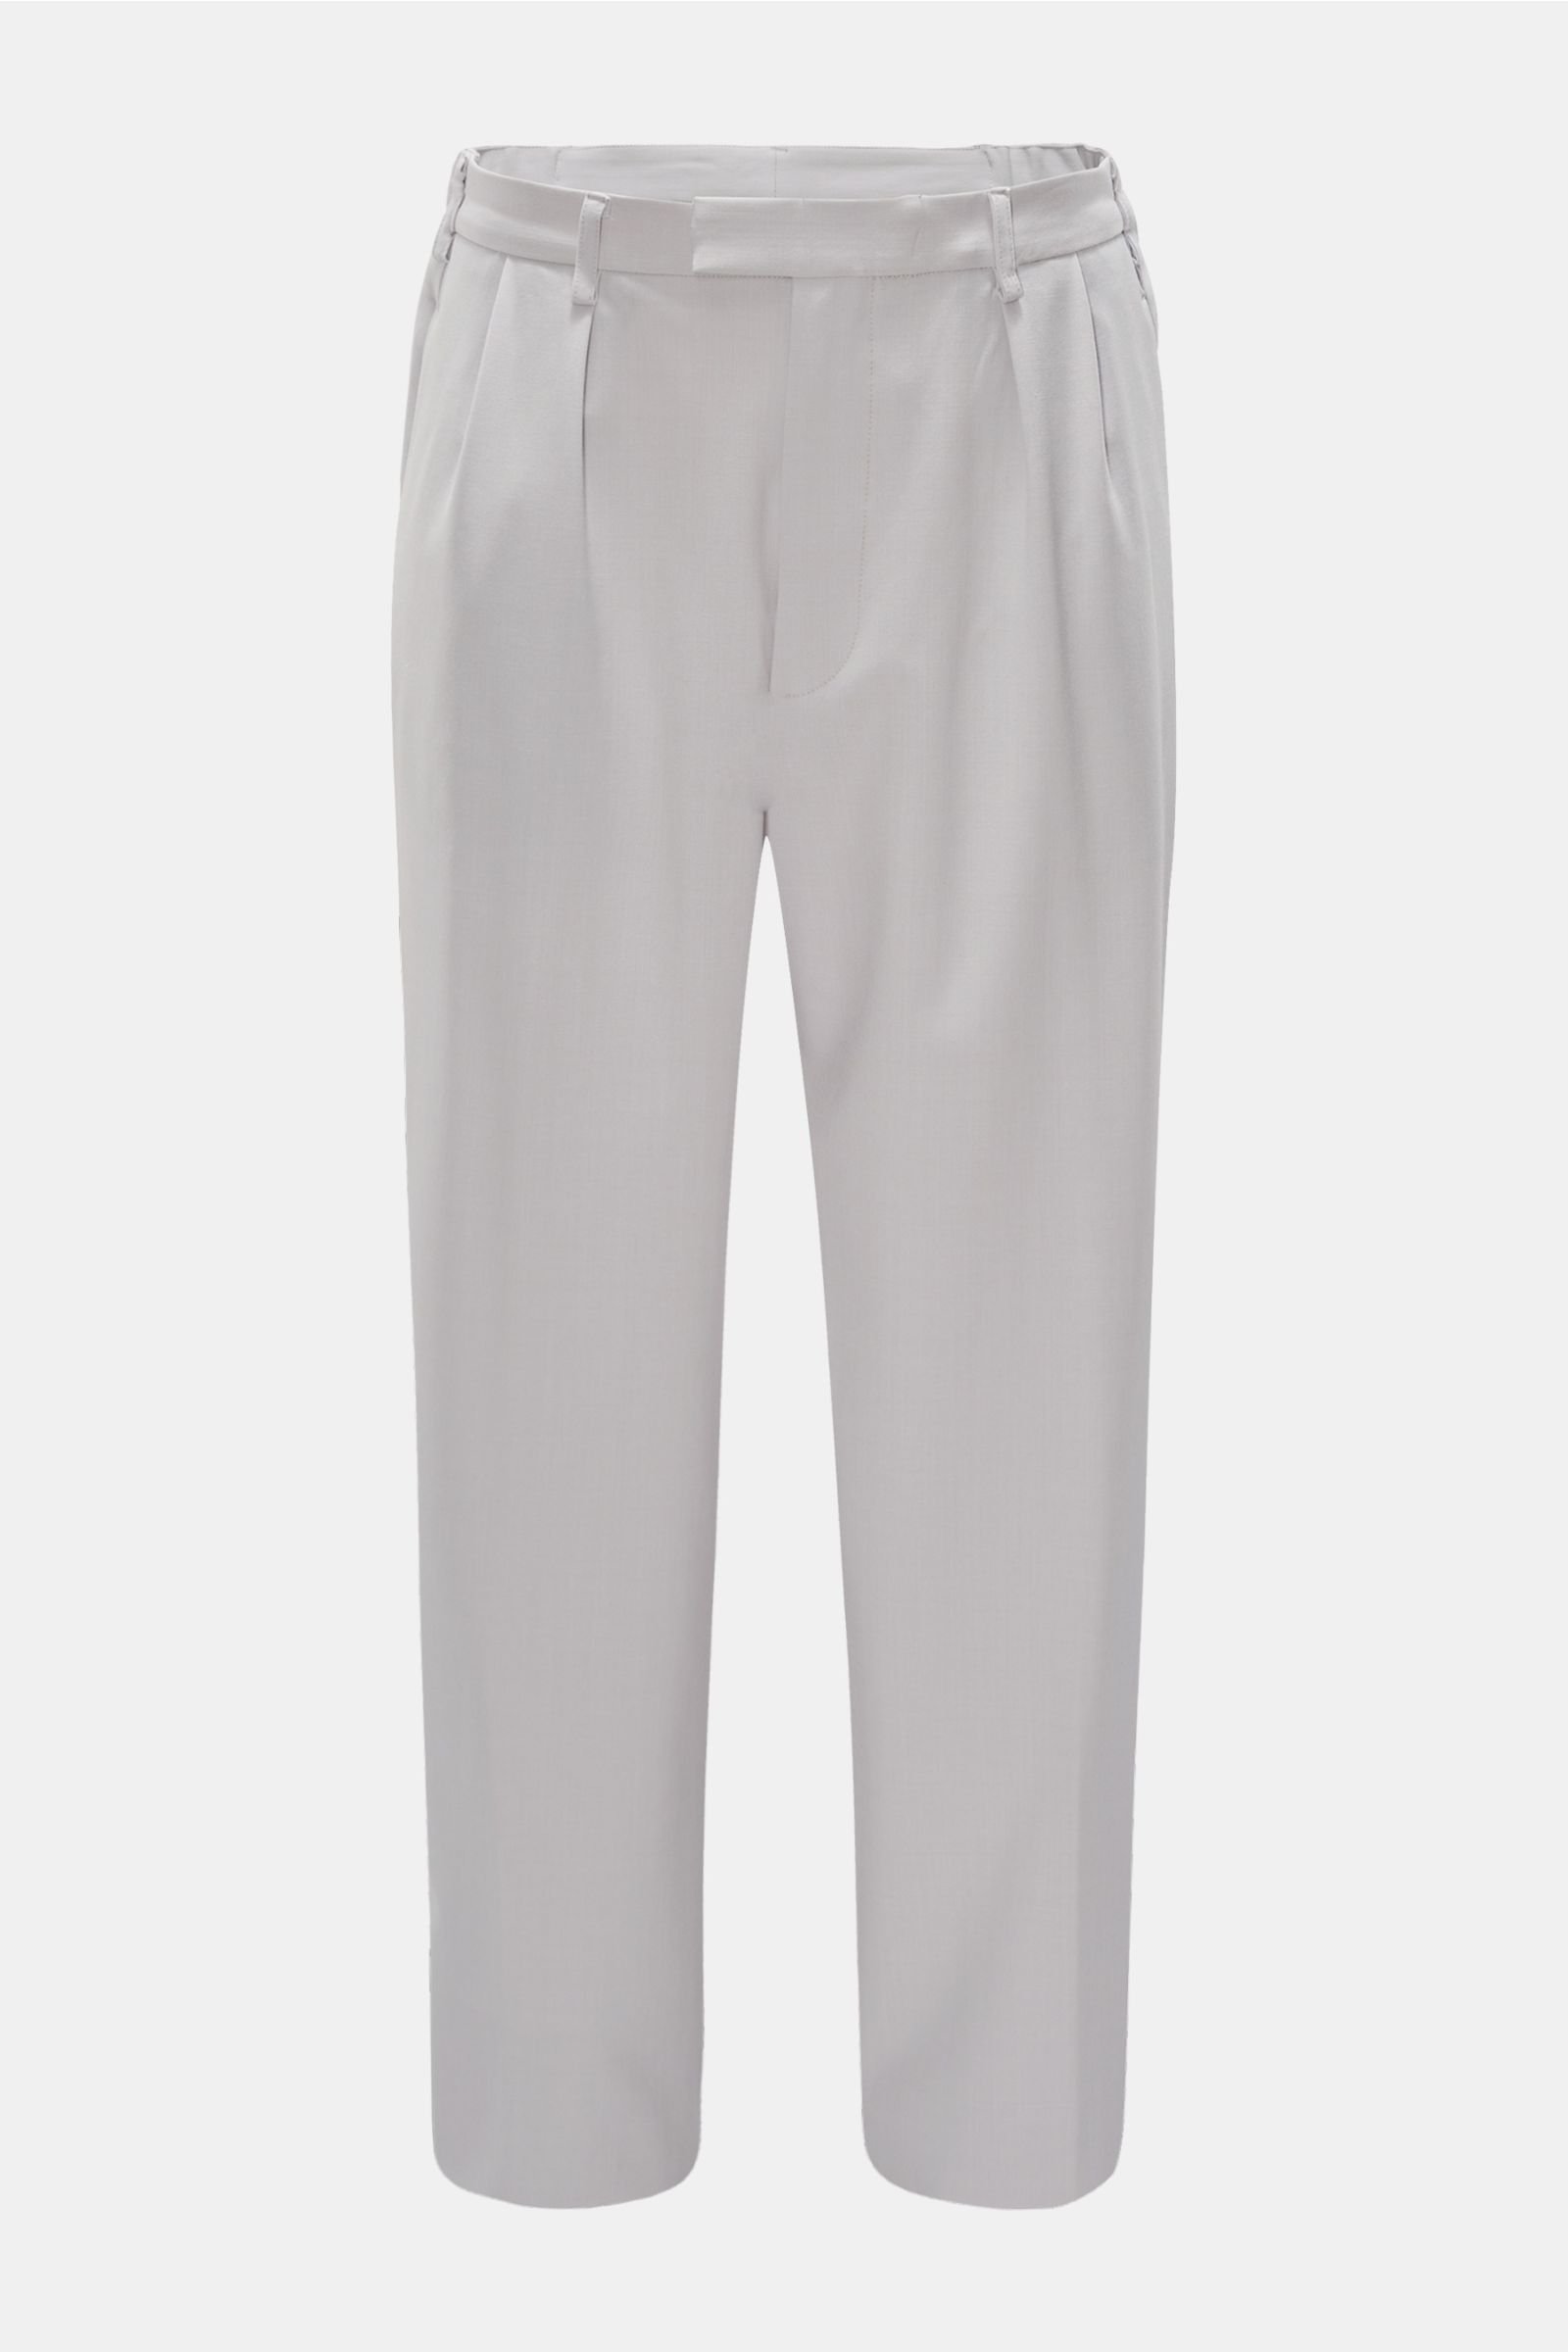 Trousers 'Baggy' light grey